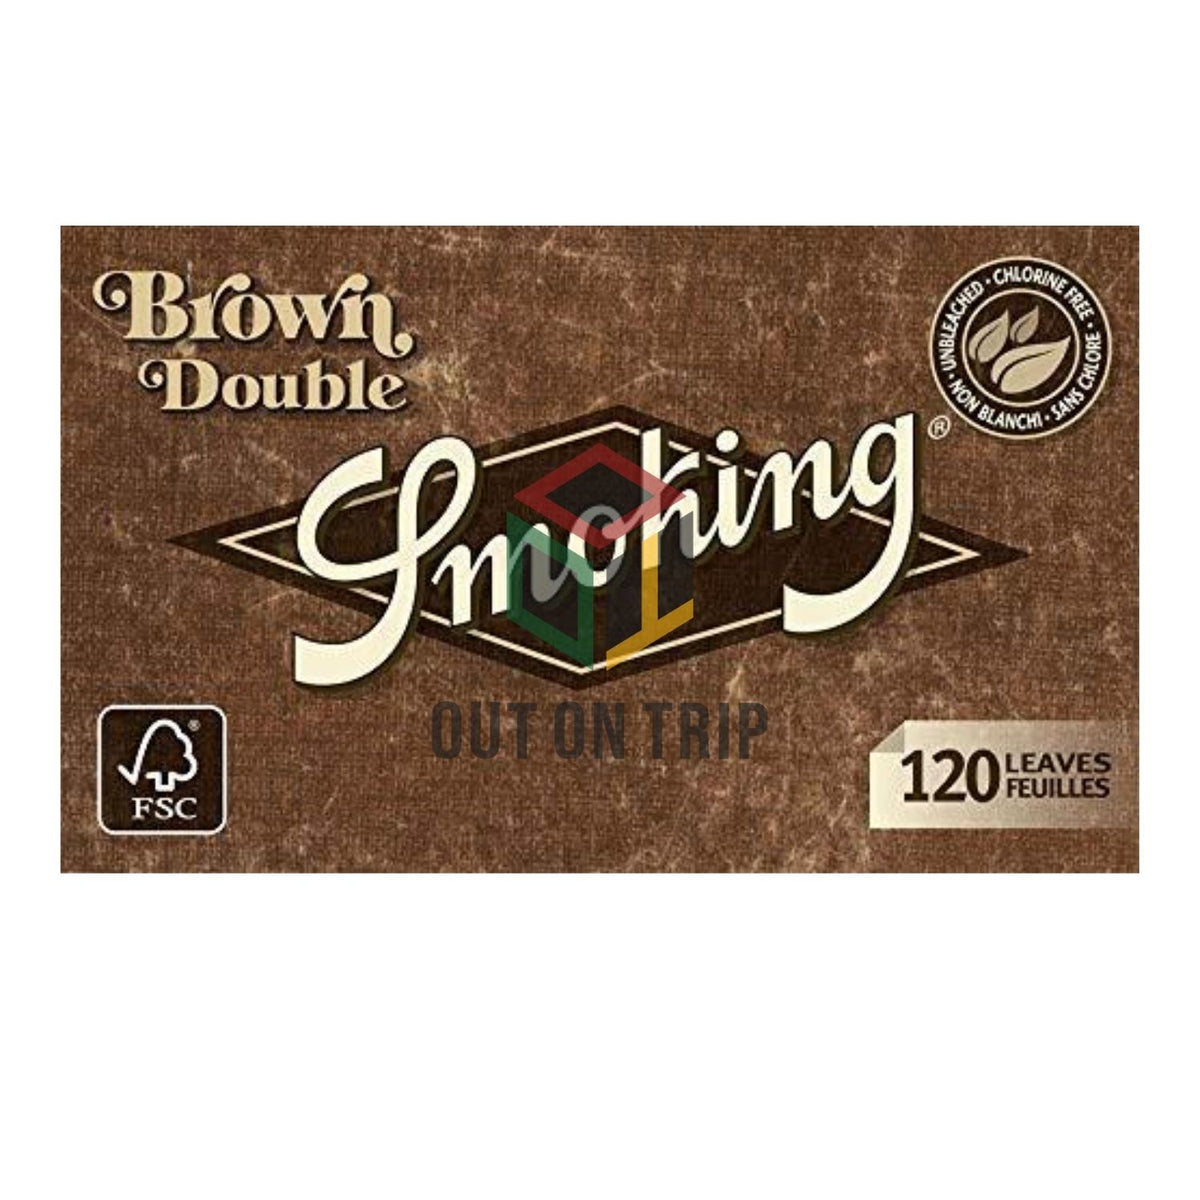 SMOKING Brown Double Unbleached Regular Size - 120 Leaves